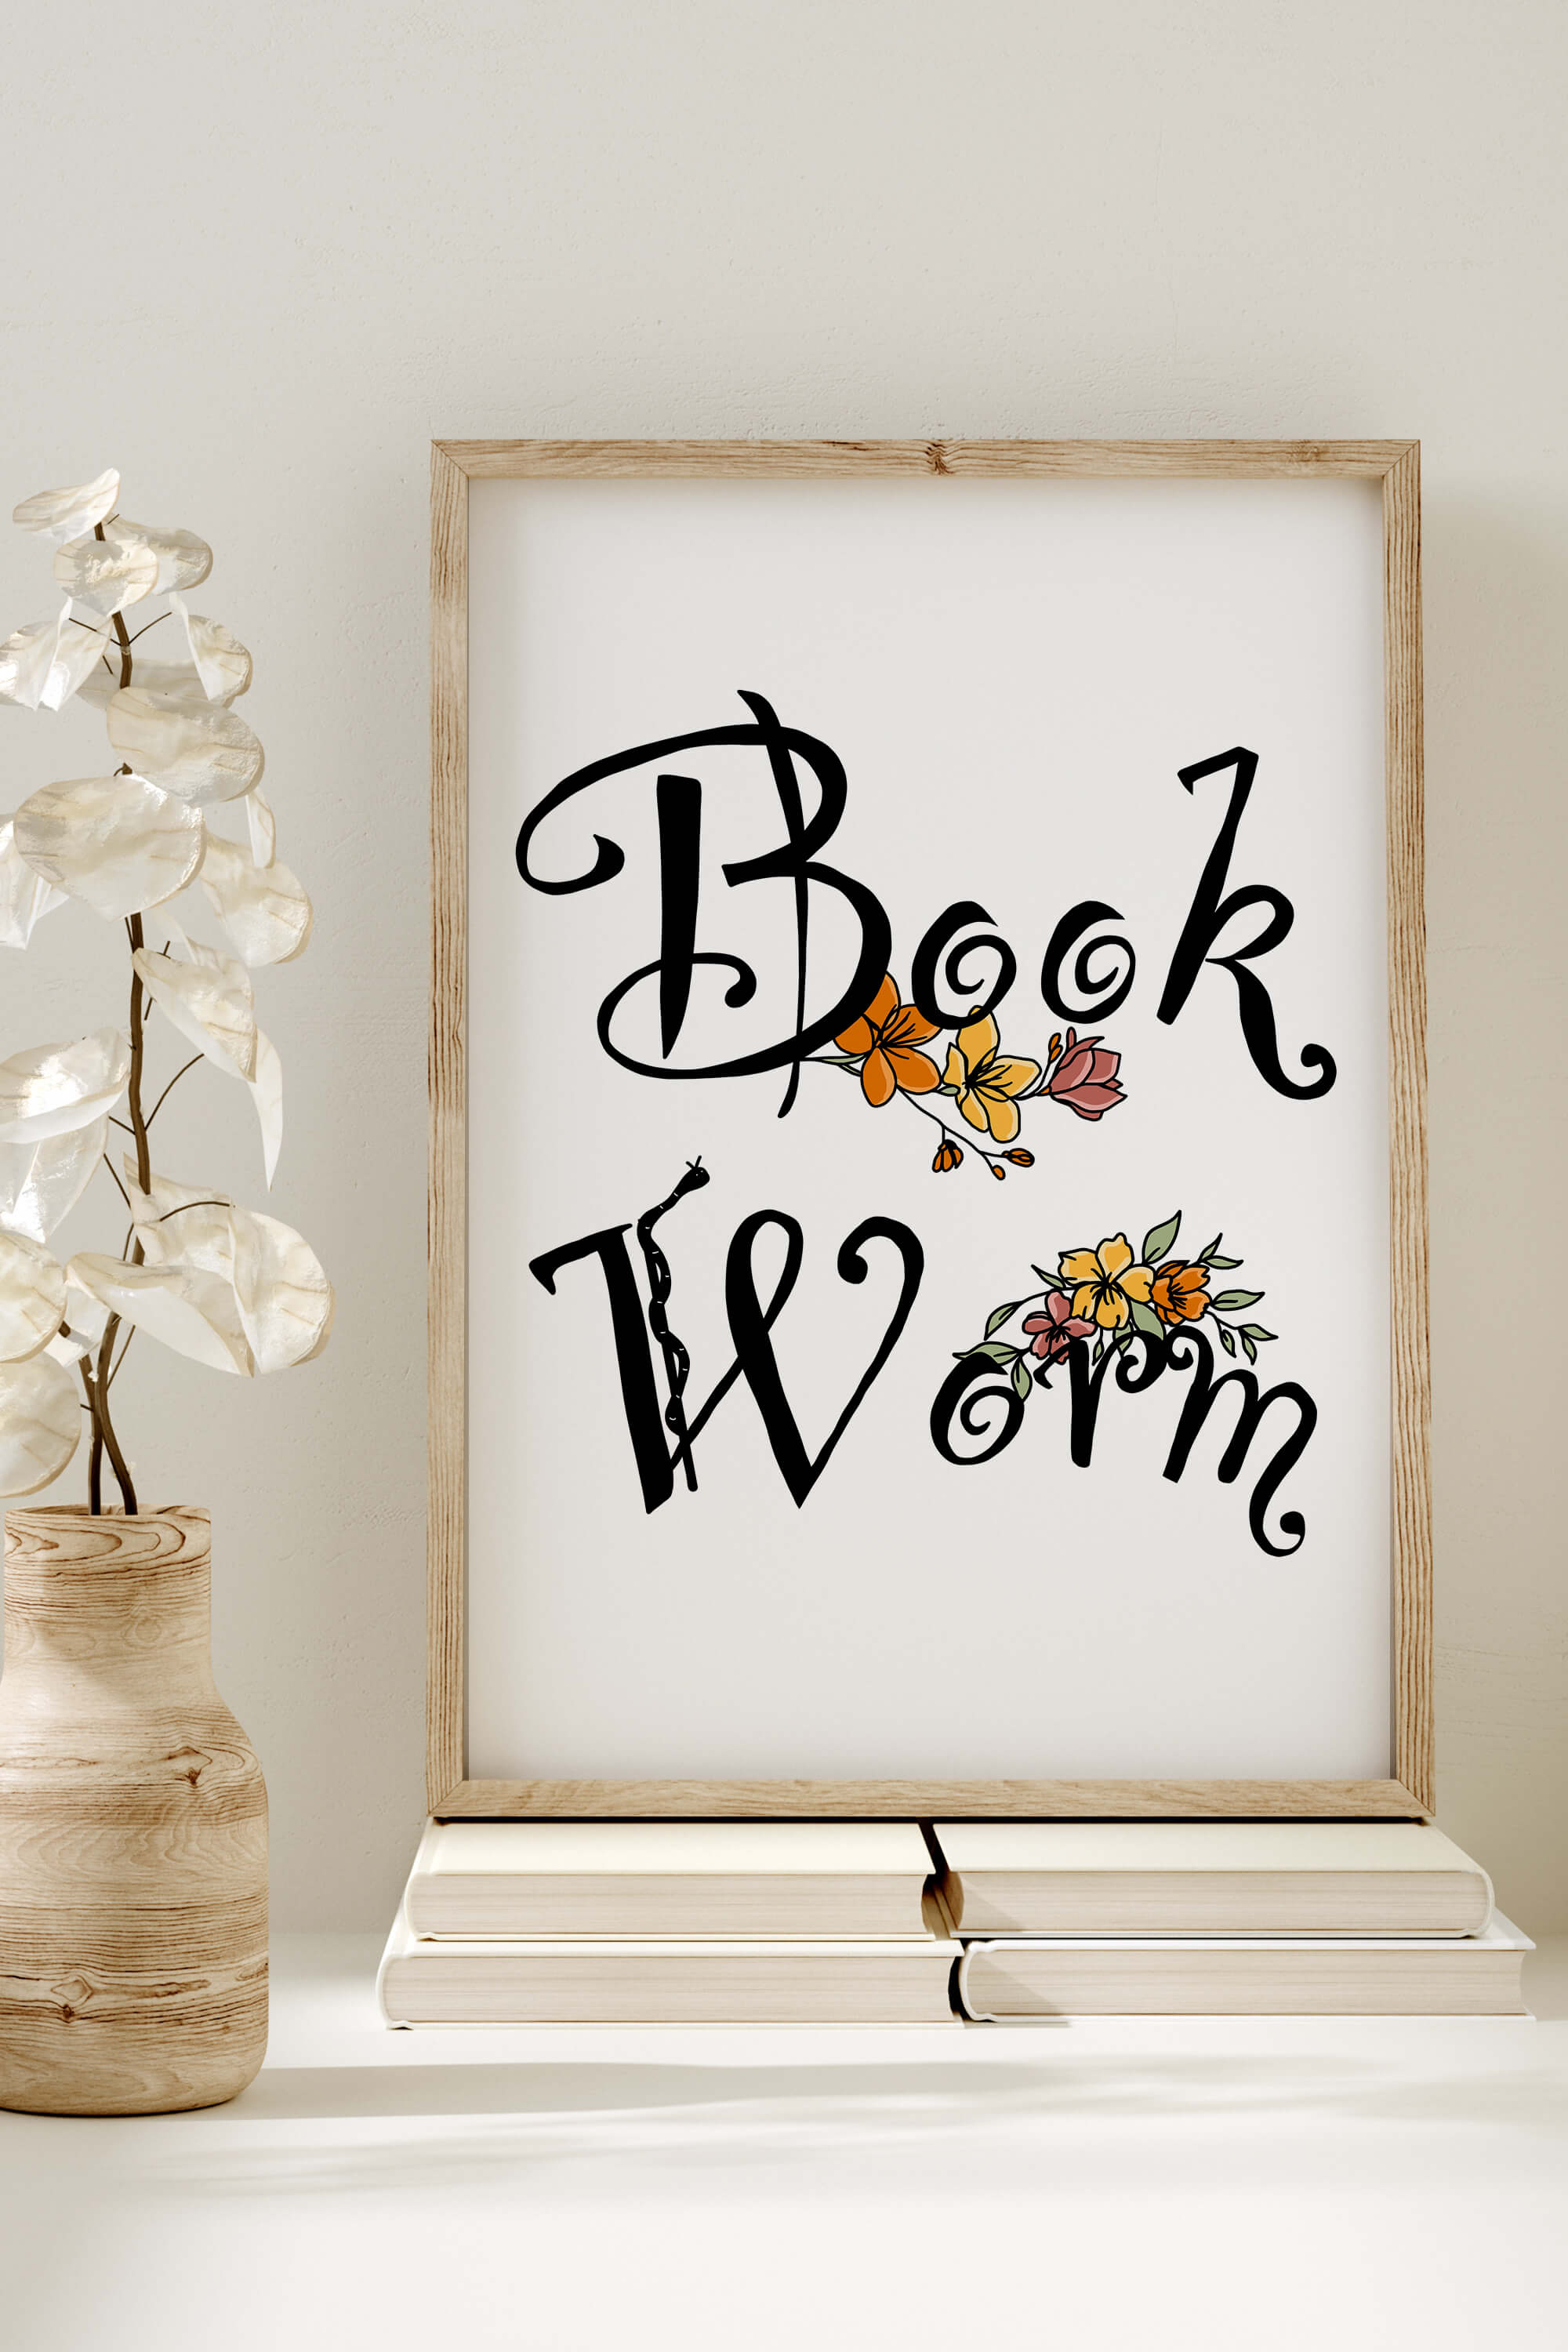 A heartfelt book nook art print, a thoughtful gift for book enthusiasts. Capturing the essence of literary passion, this print combines exquisite writing and stunning art. Perfect for celebrating the joy of reading, the print is a meaningful present that goes beyond the ordinary.